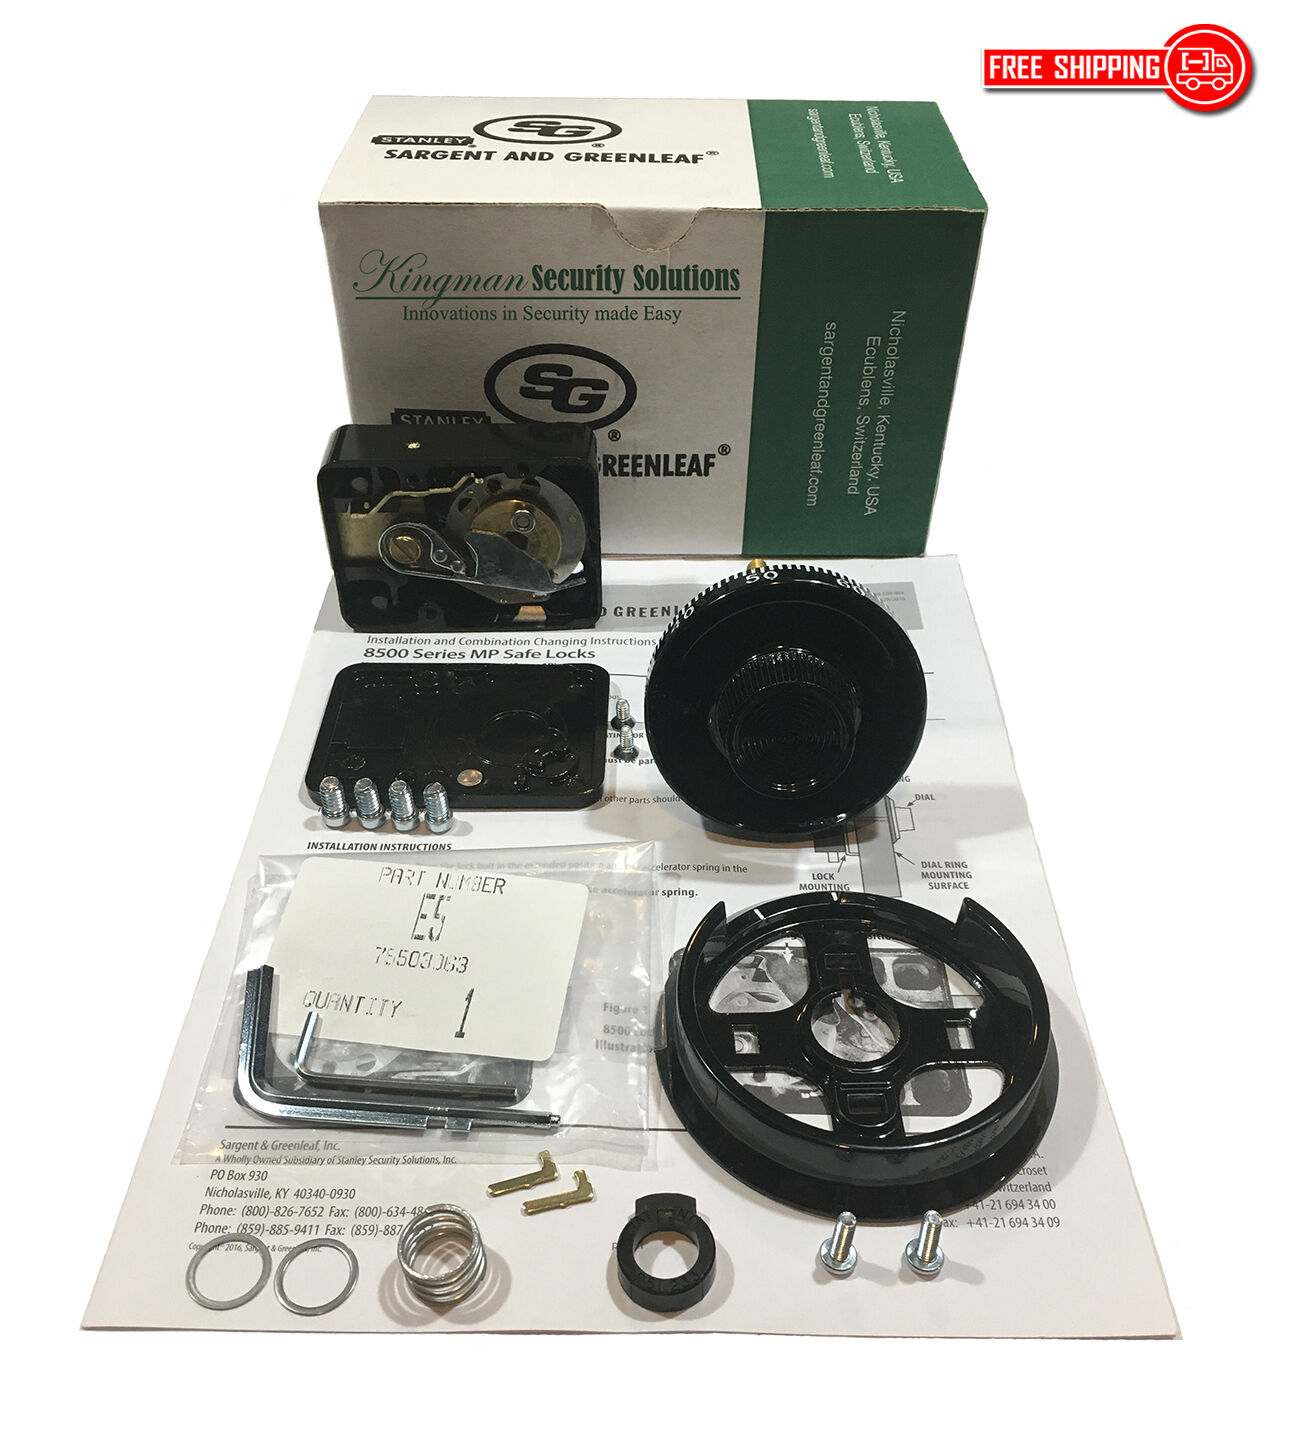 S&g - Sargent And Greenleaf 8550-100 Mechanical Combination Dial & Lock Kit -nib